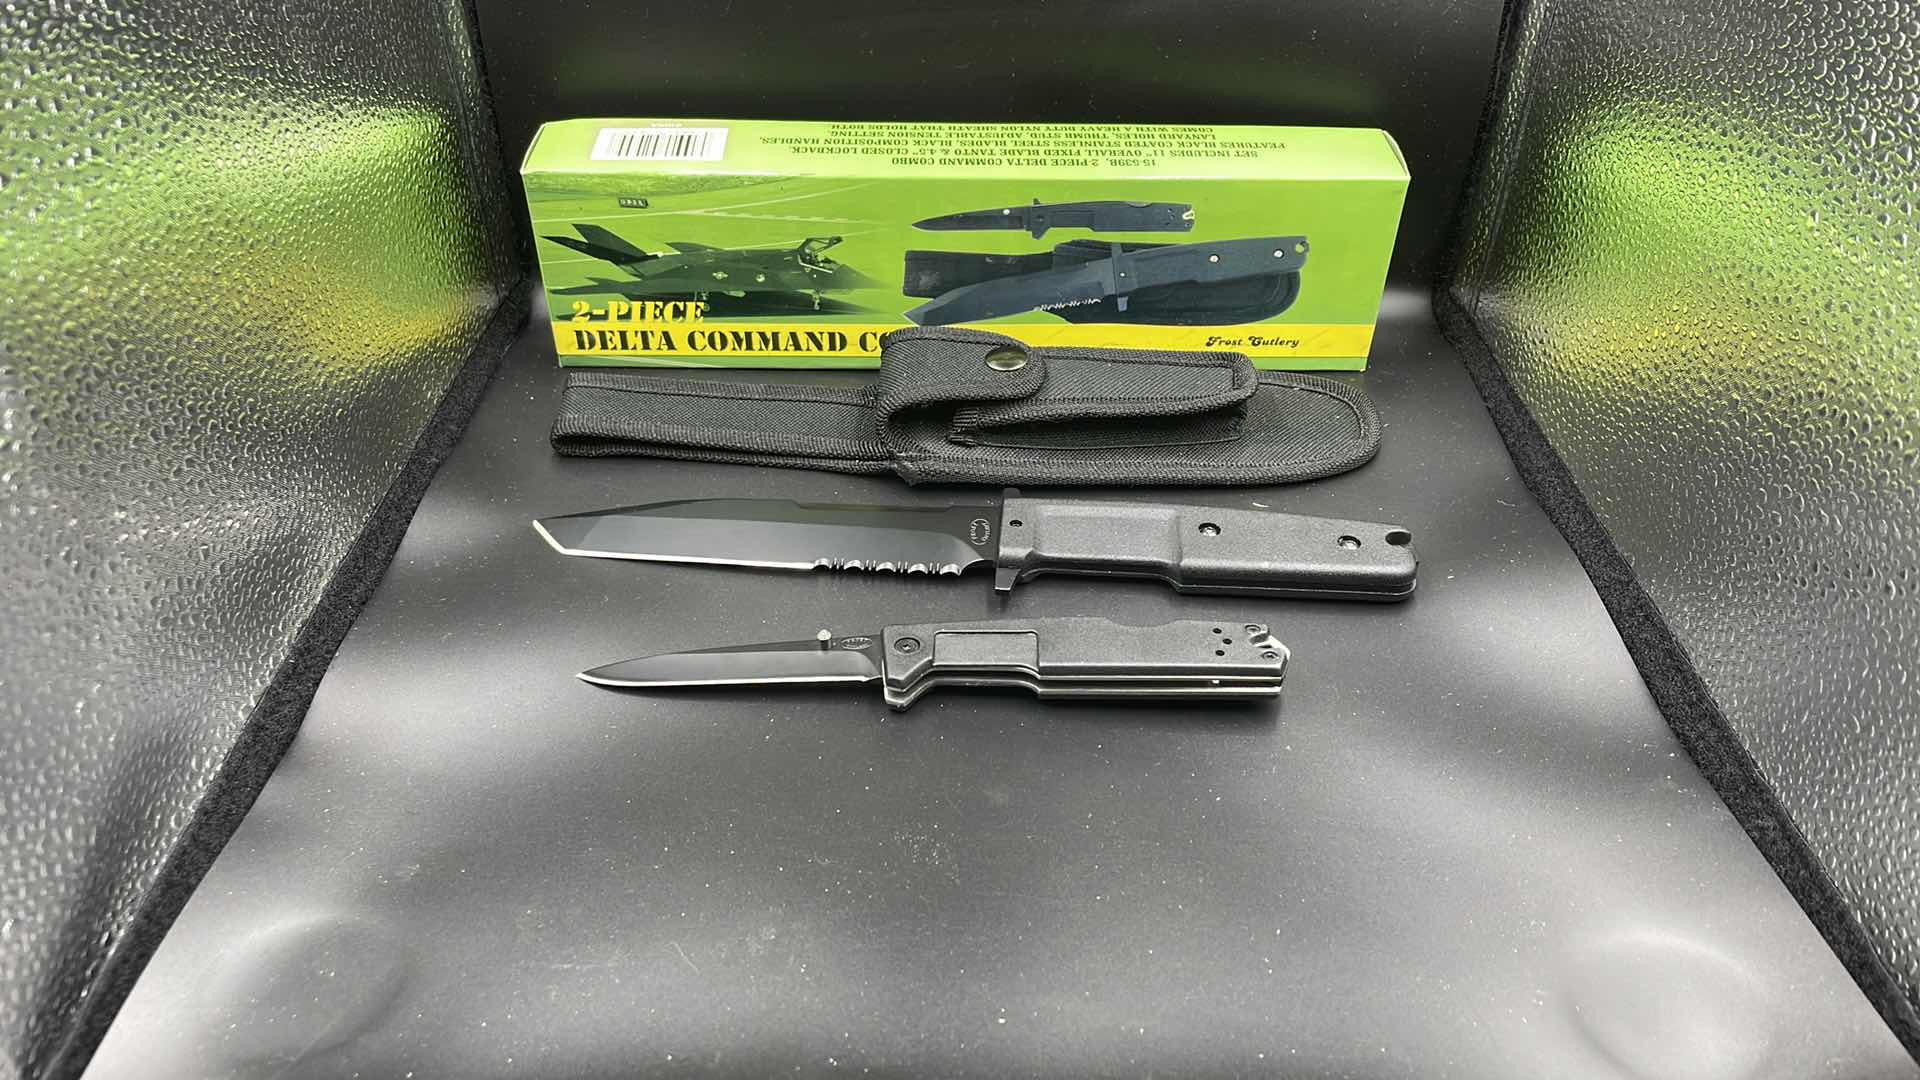 Photo 2 of FROST CUTLERY 2 PIECE DELTA COMMAND KNIFE SET WITH SHEATH 11”